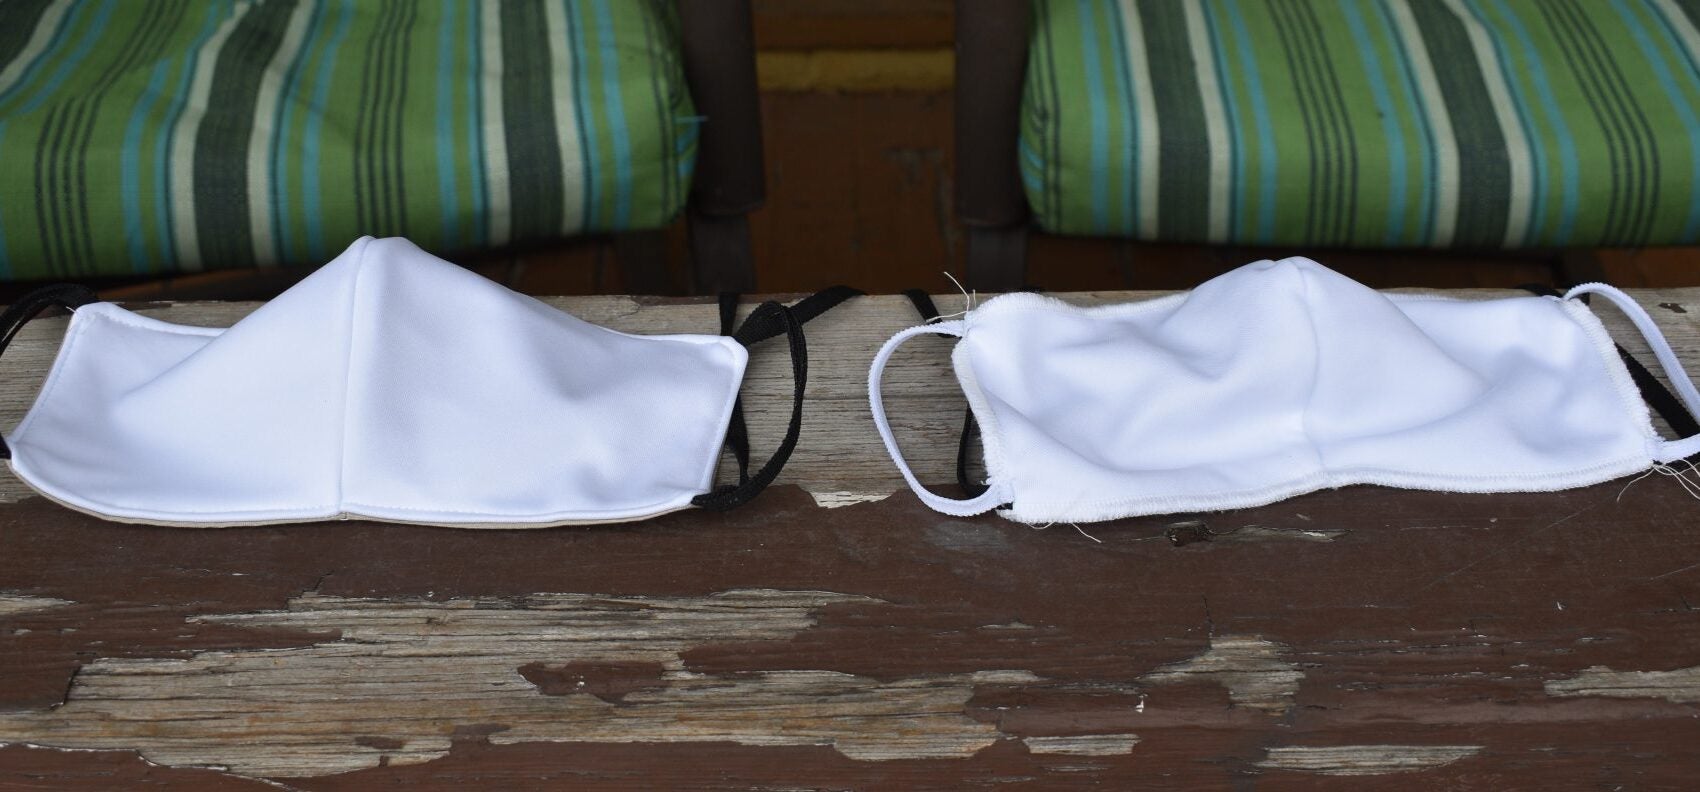 Two masks made by All Sports America are shown on Scott Hoffman’s porch in Sunbury, Northumberland County, on April 29, 2020. (Ed Mahon / PA Post)